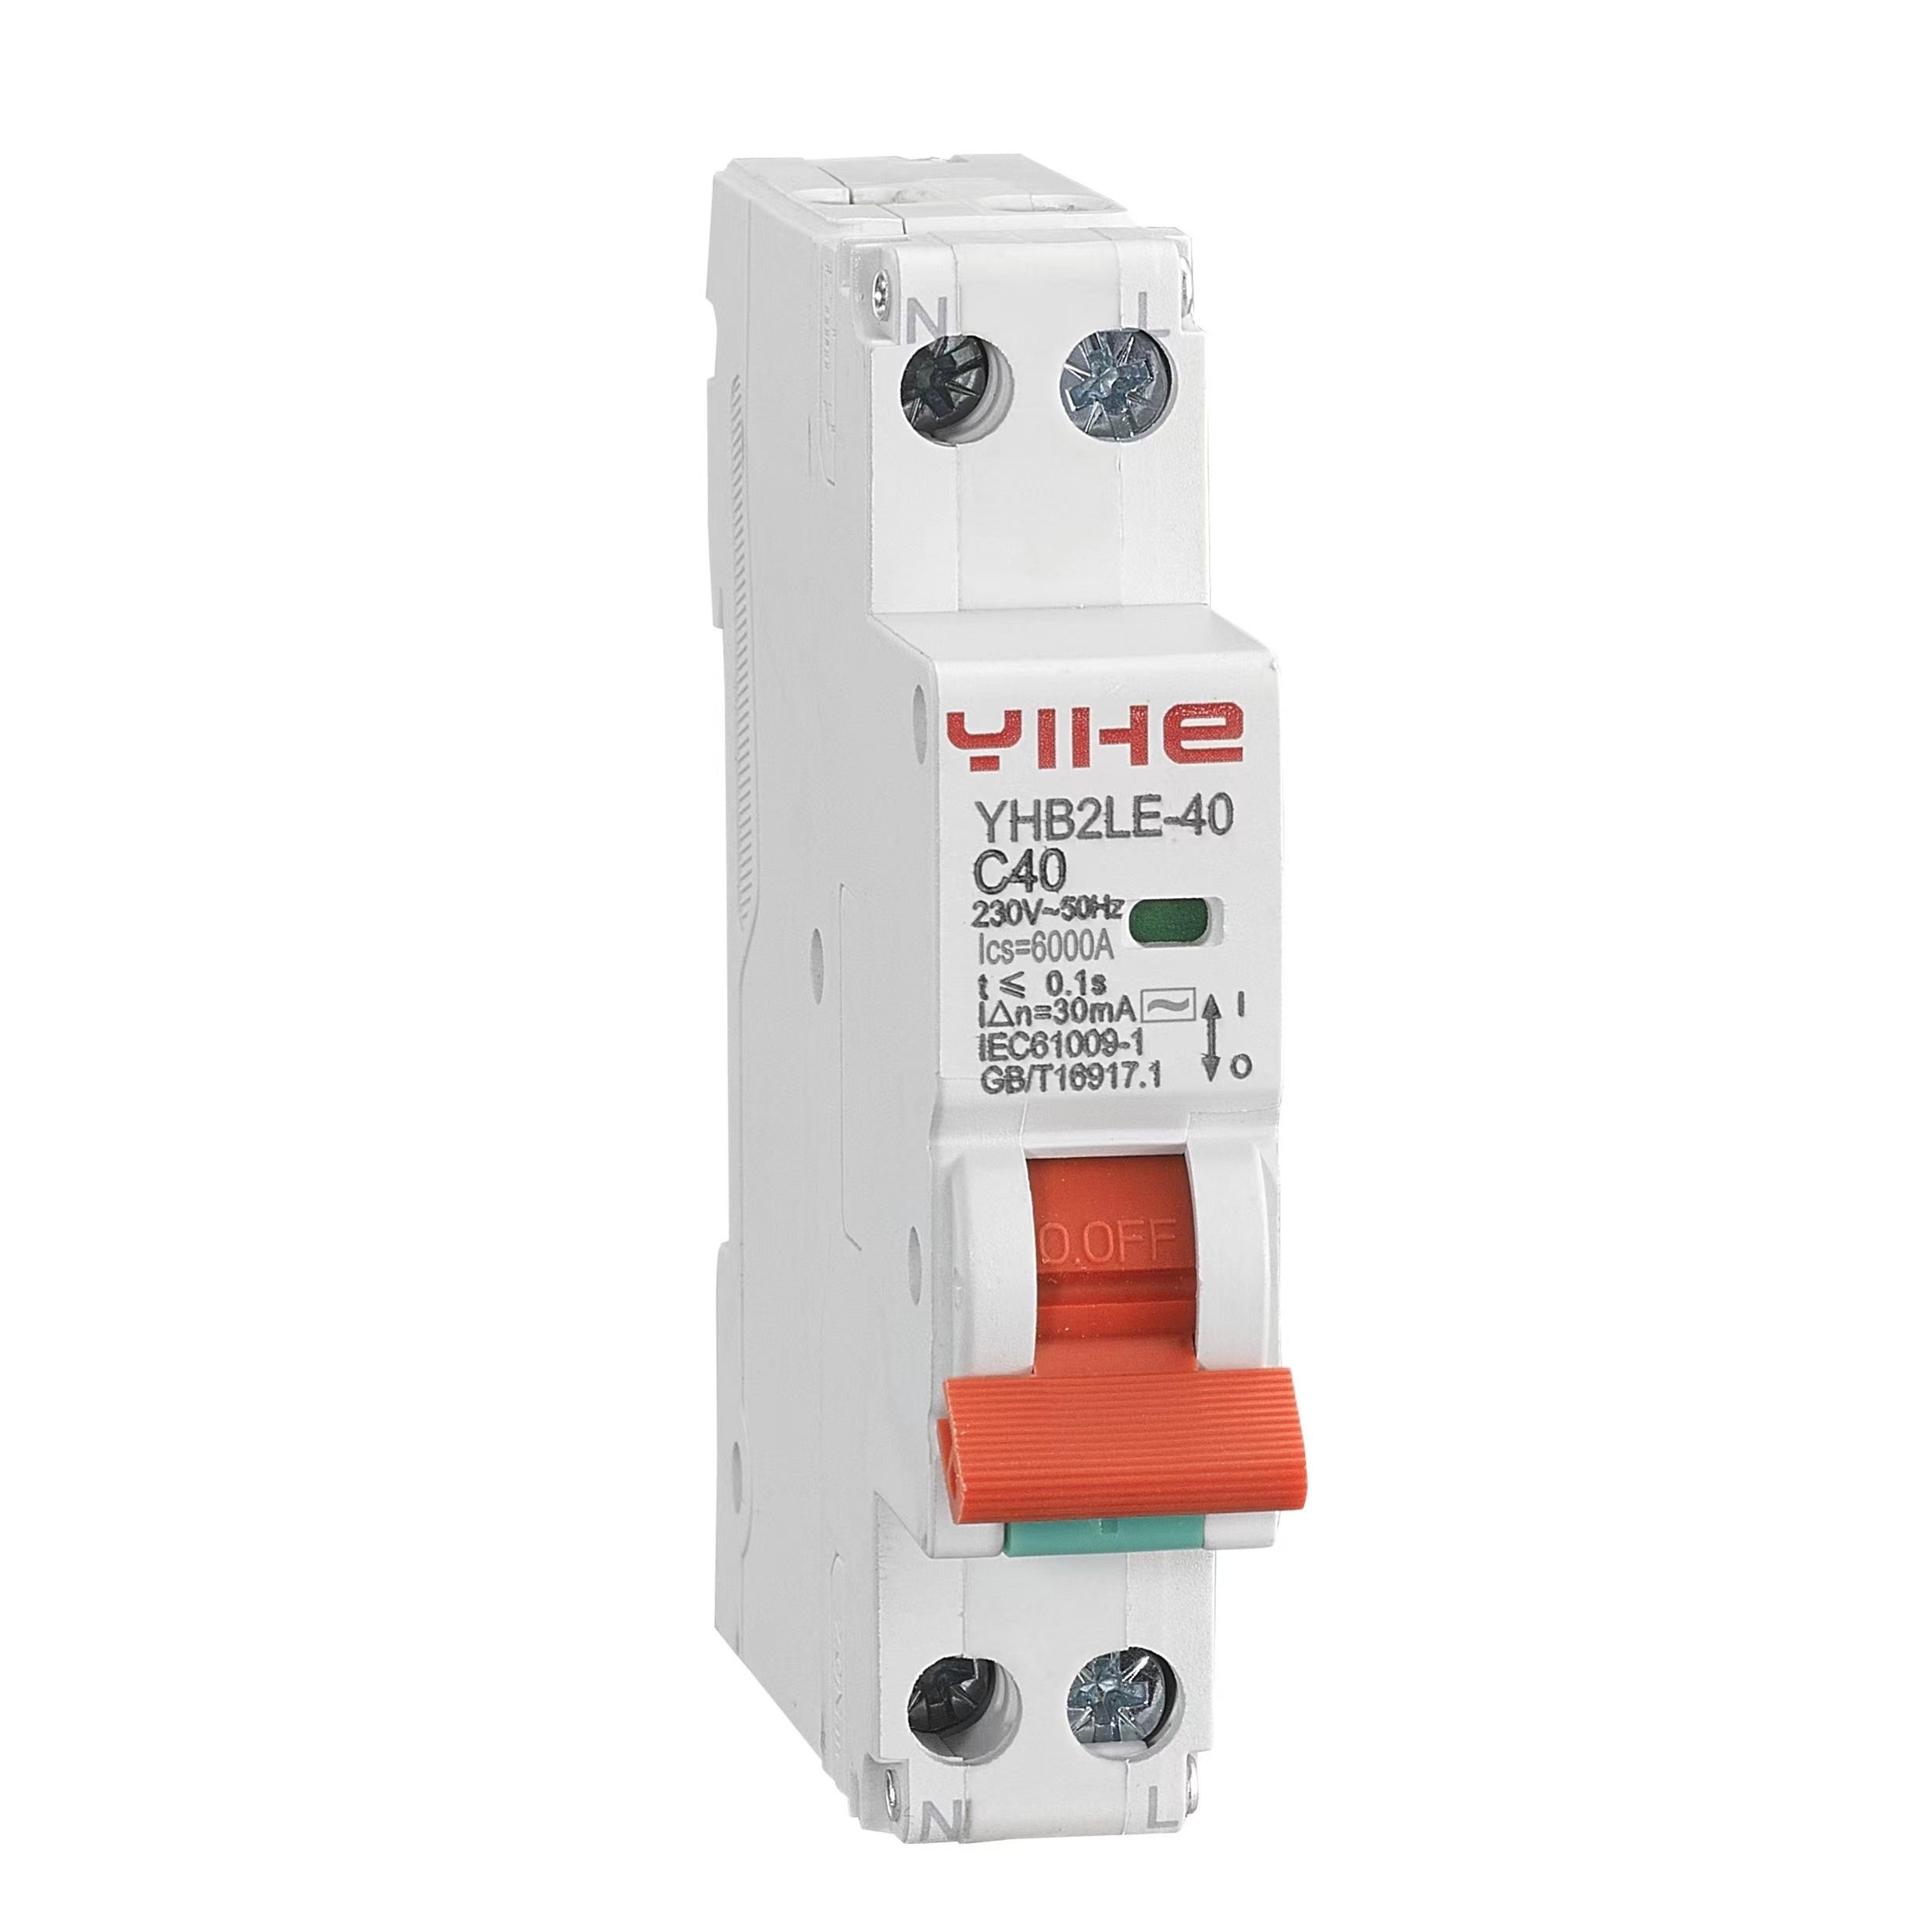 YHB2LE-40 DPN Residual Current Operated Circuit Breaker